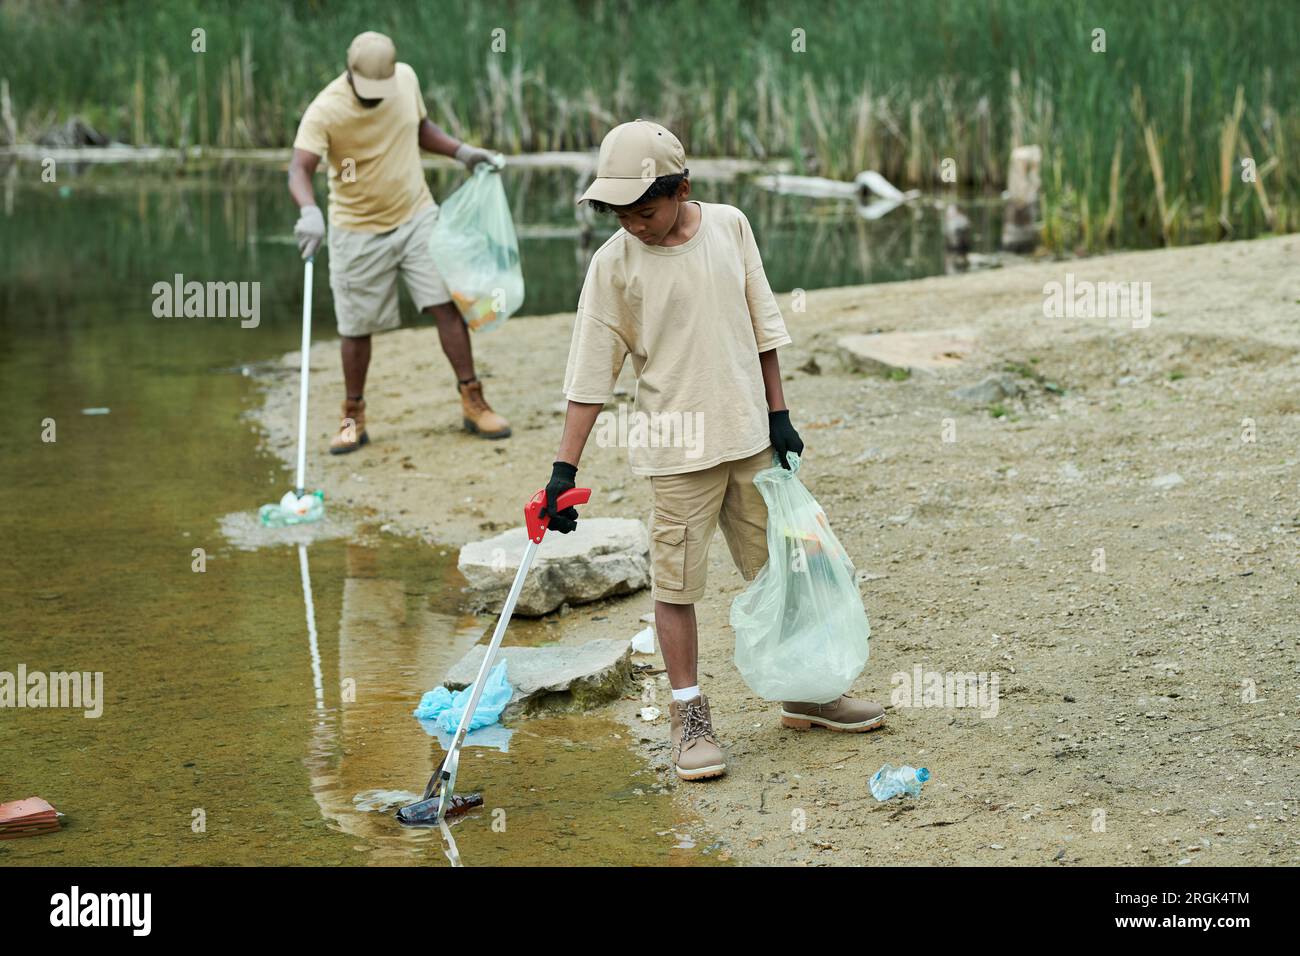 Family cleaning water from garbage together outdoors Stock Photo